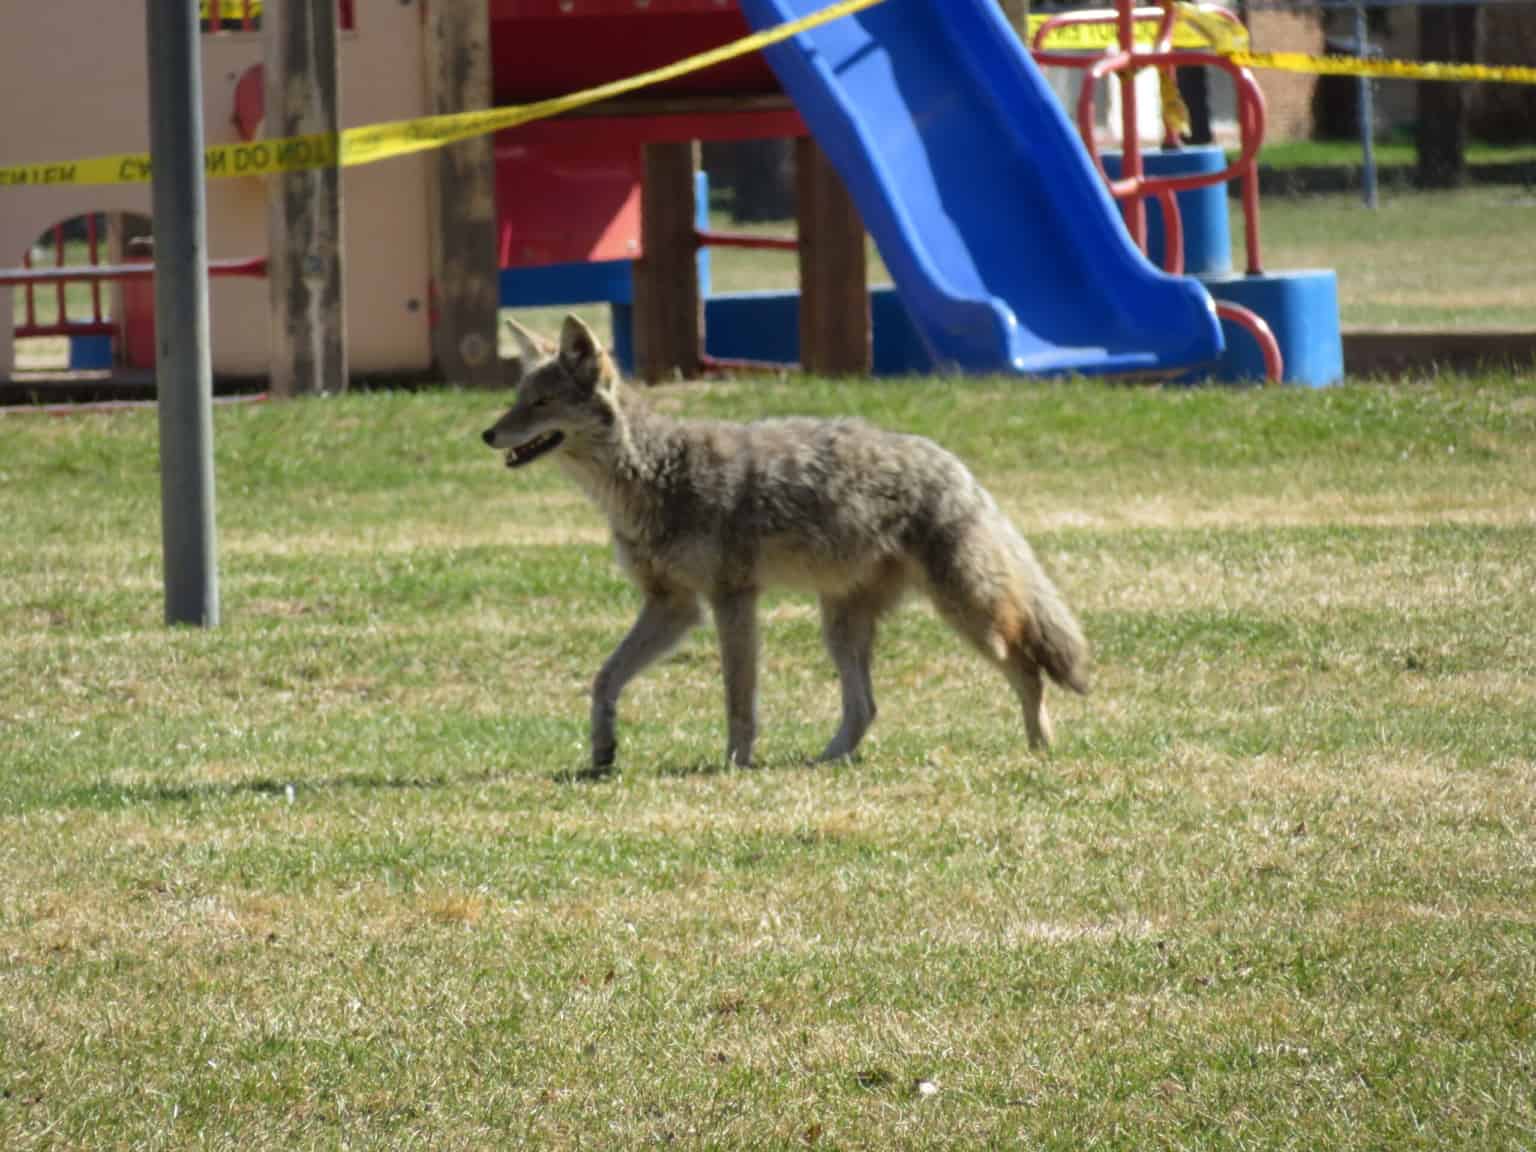 People can co-exist peacefully with coyotes, but it takes effort to train coyotes to stay away. | Colleen St Clair